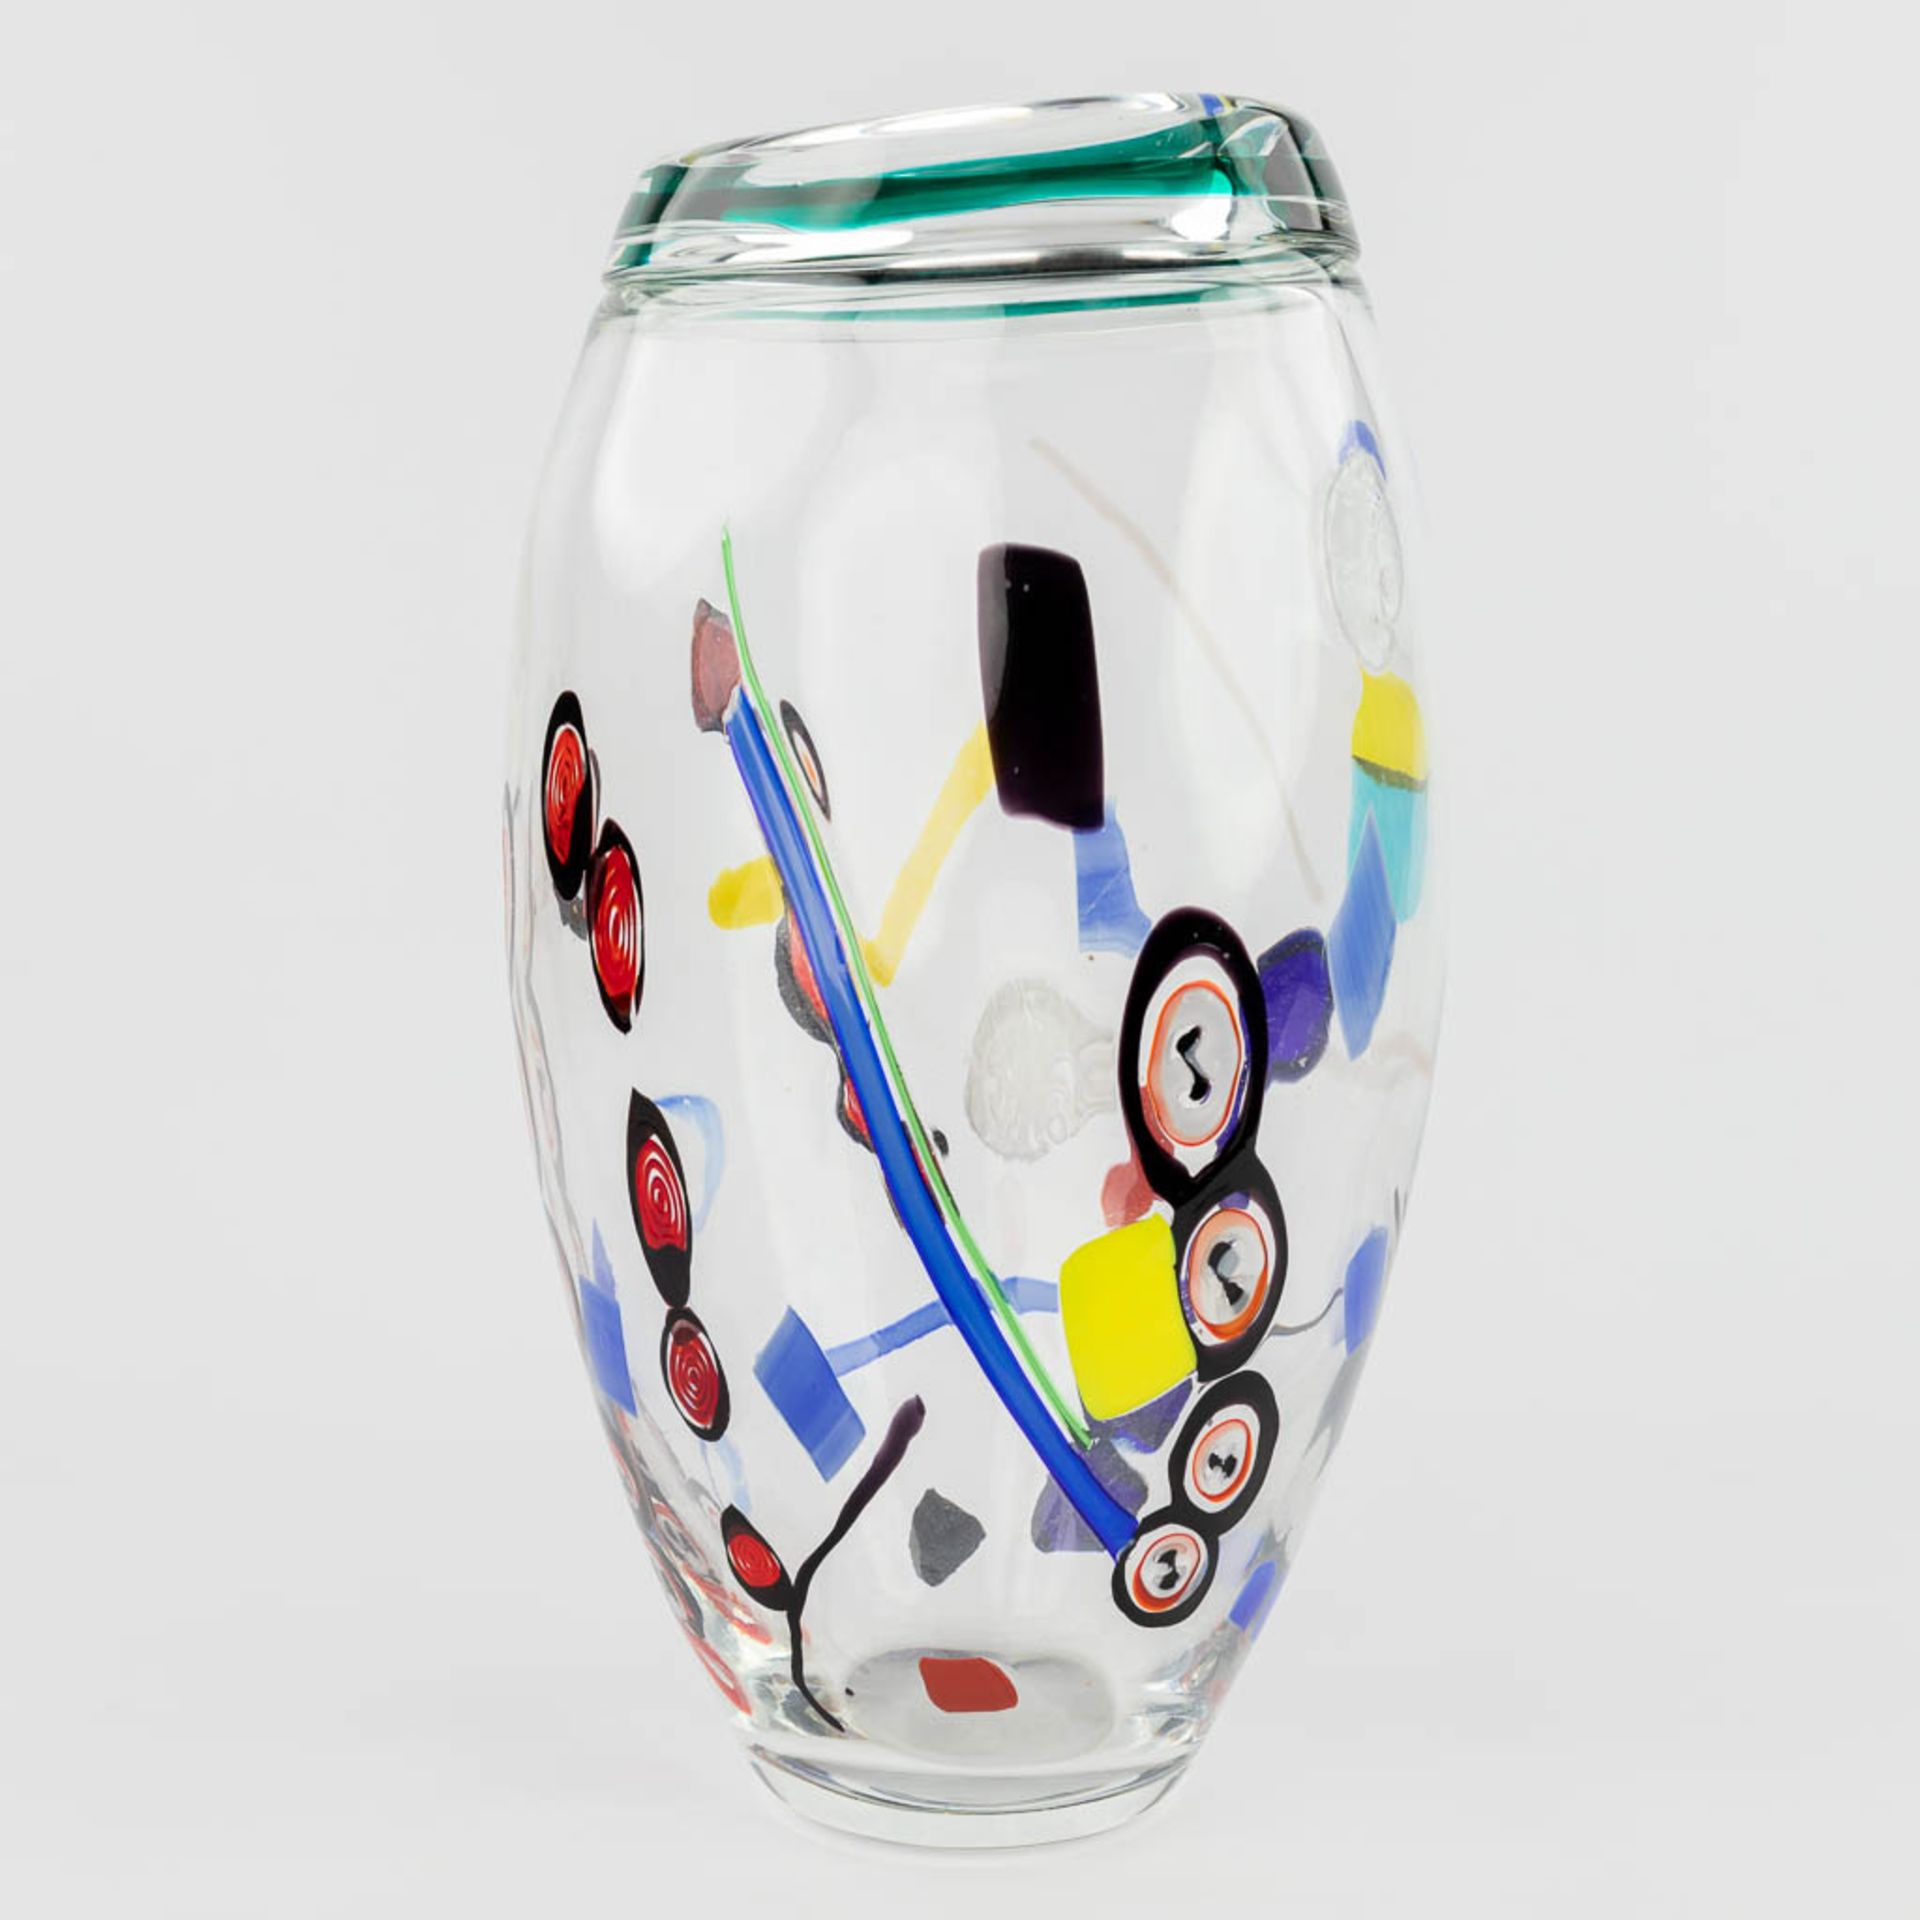 Seguso e Barovier, a large vase, glass art and made in Murano, Italy. (L: 23 x W: 27 x H: 45 cm) - Image 12 of 17